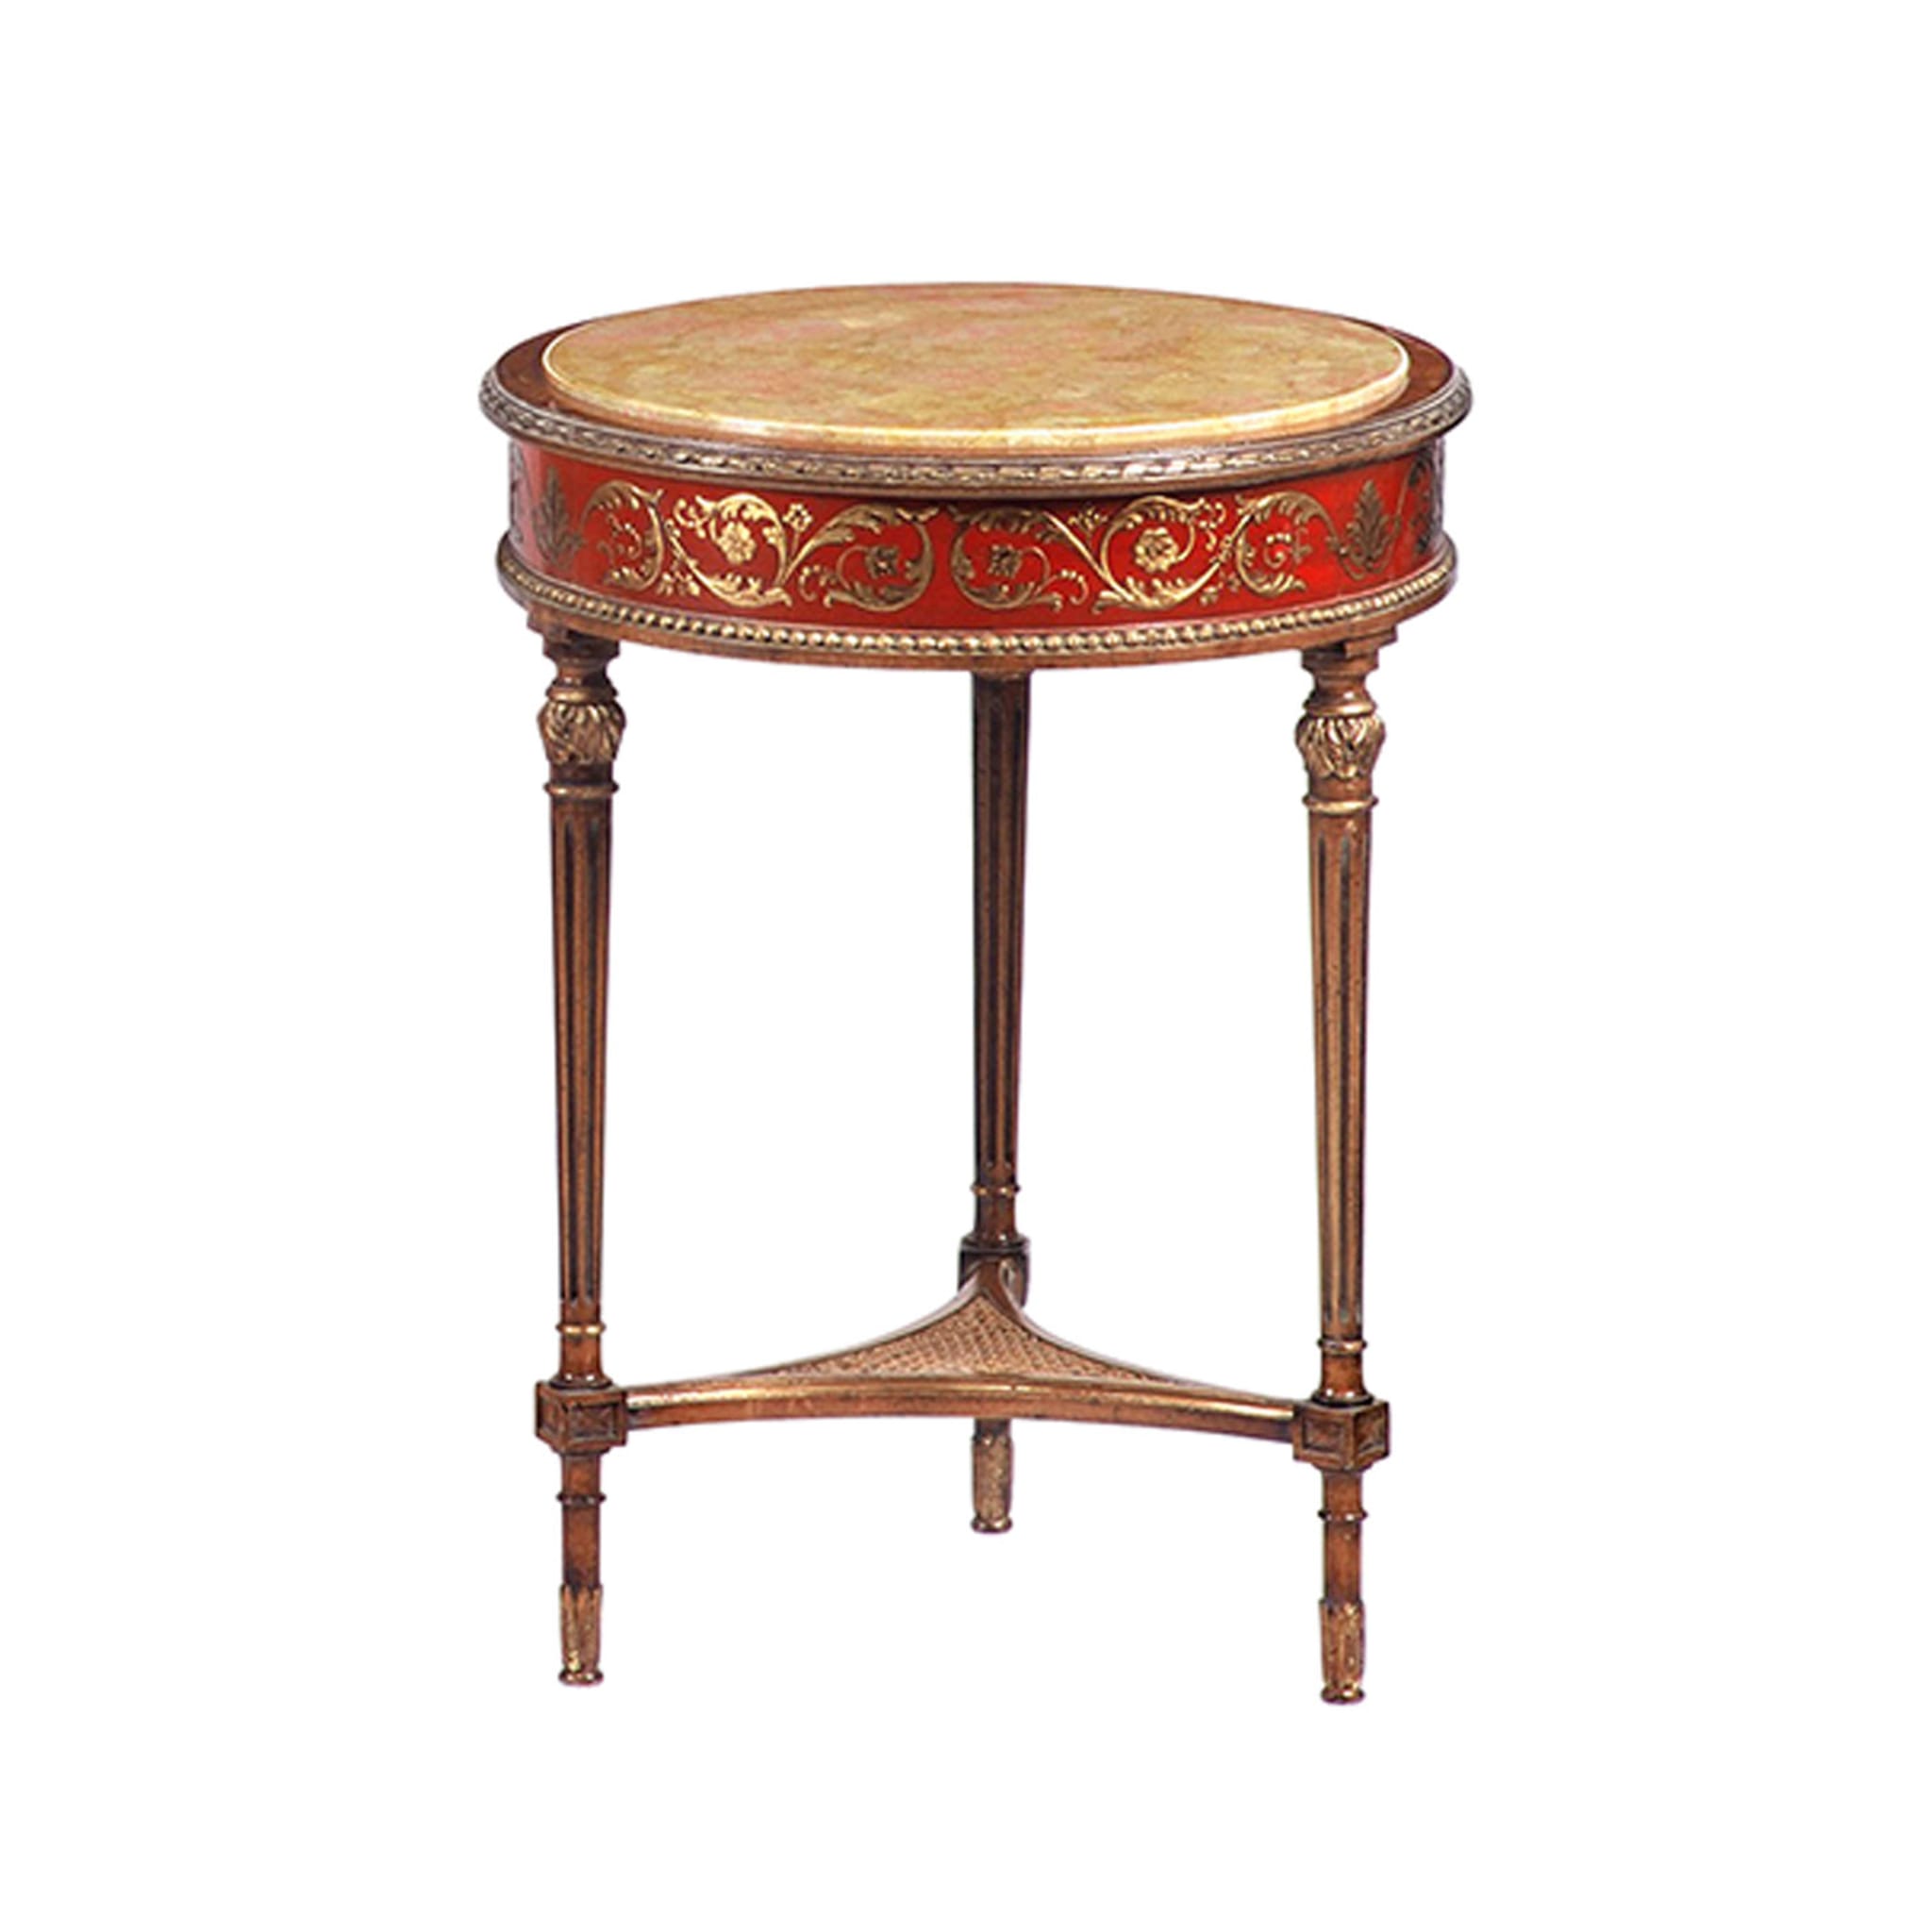 French Neoclassic-Style Gold & Red Accent Table - Alternative view 1